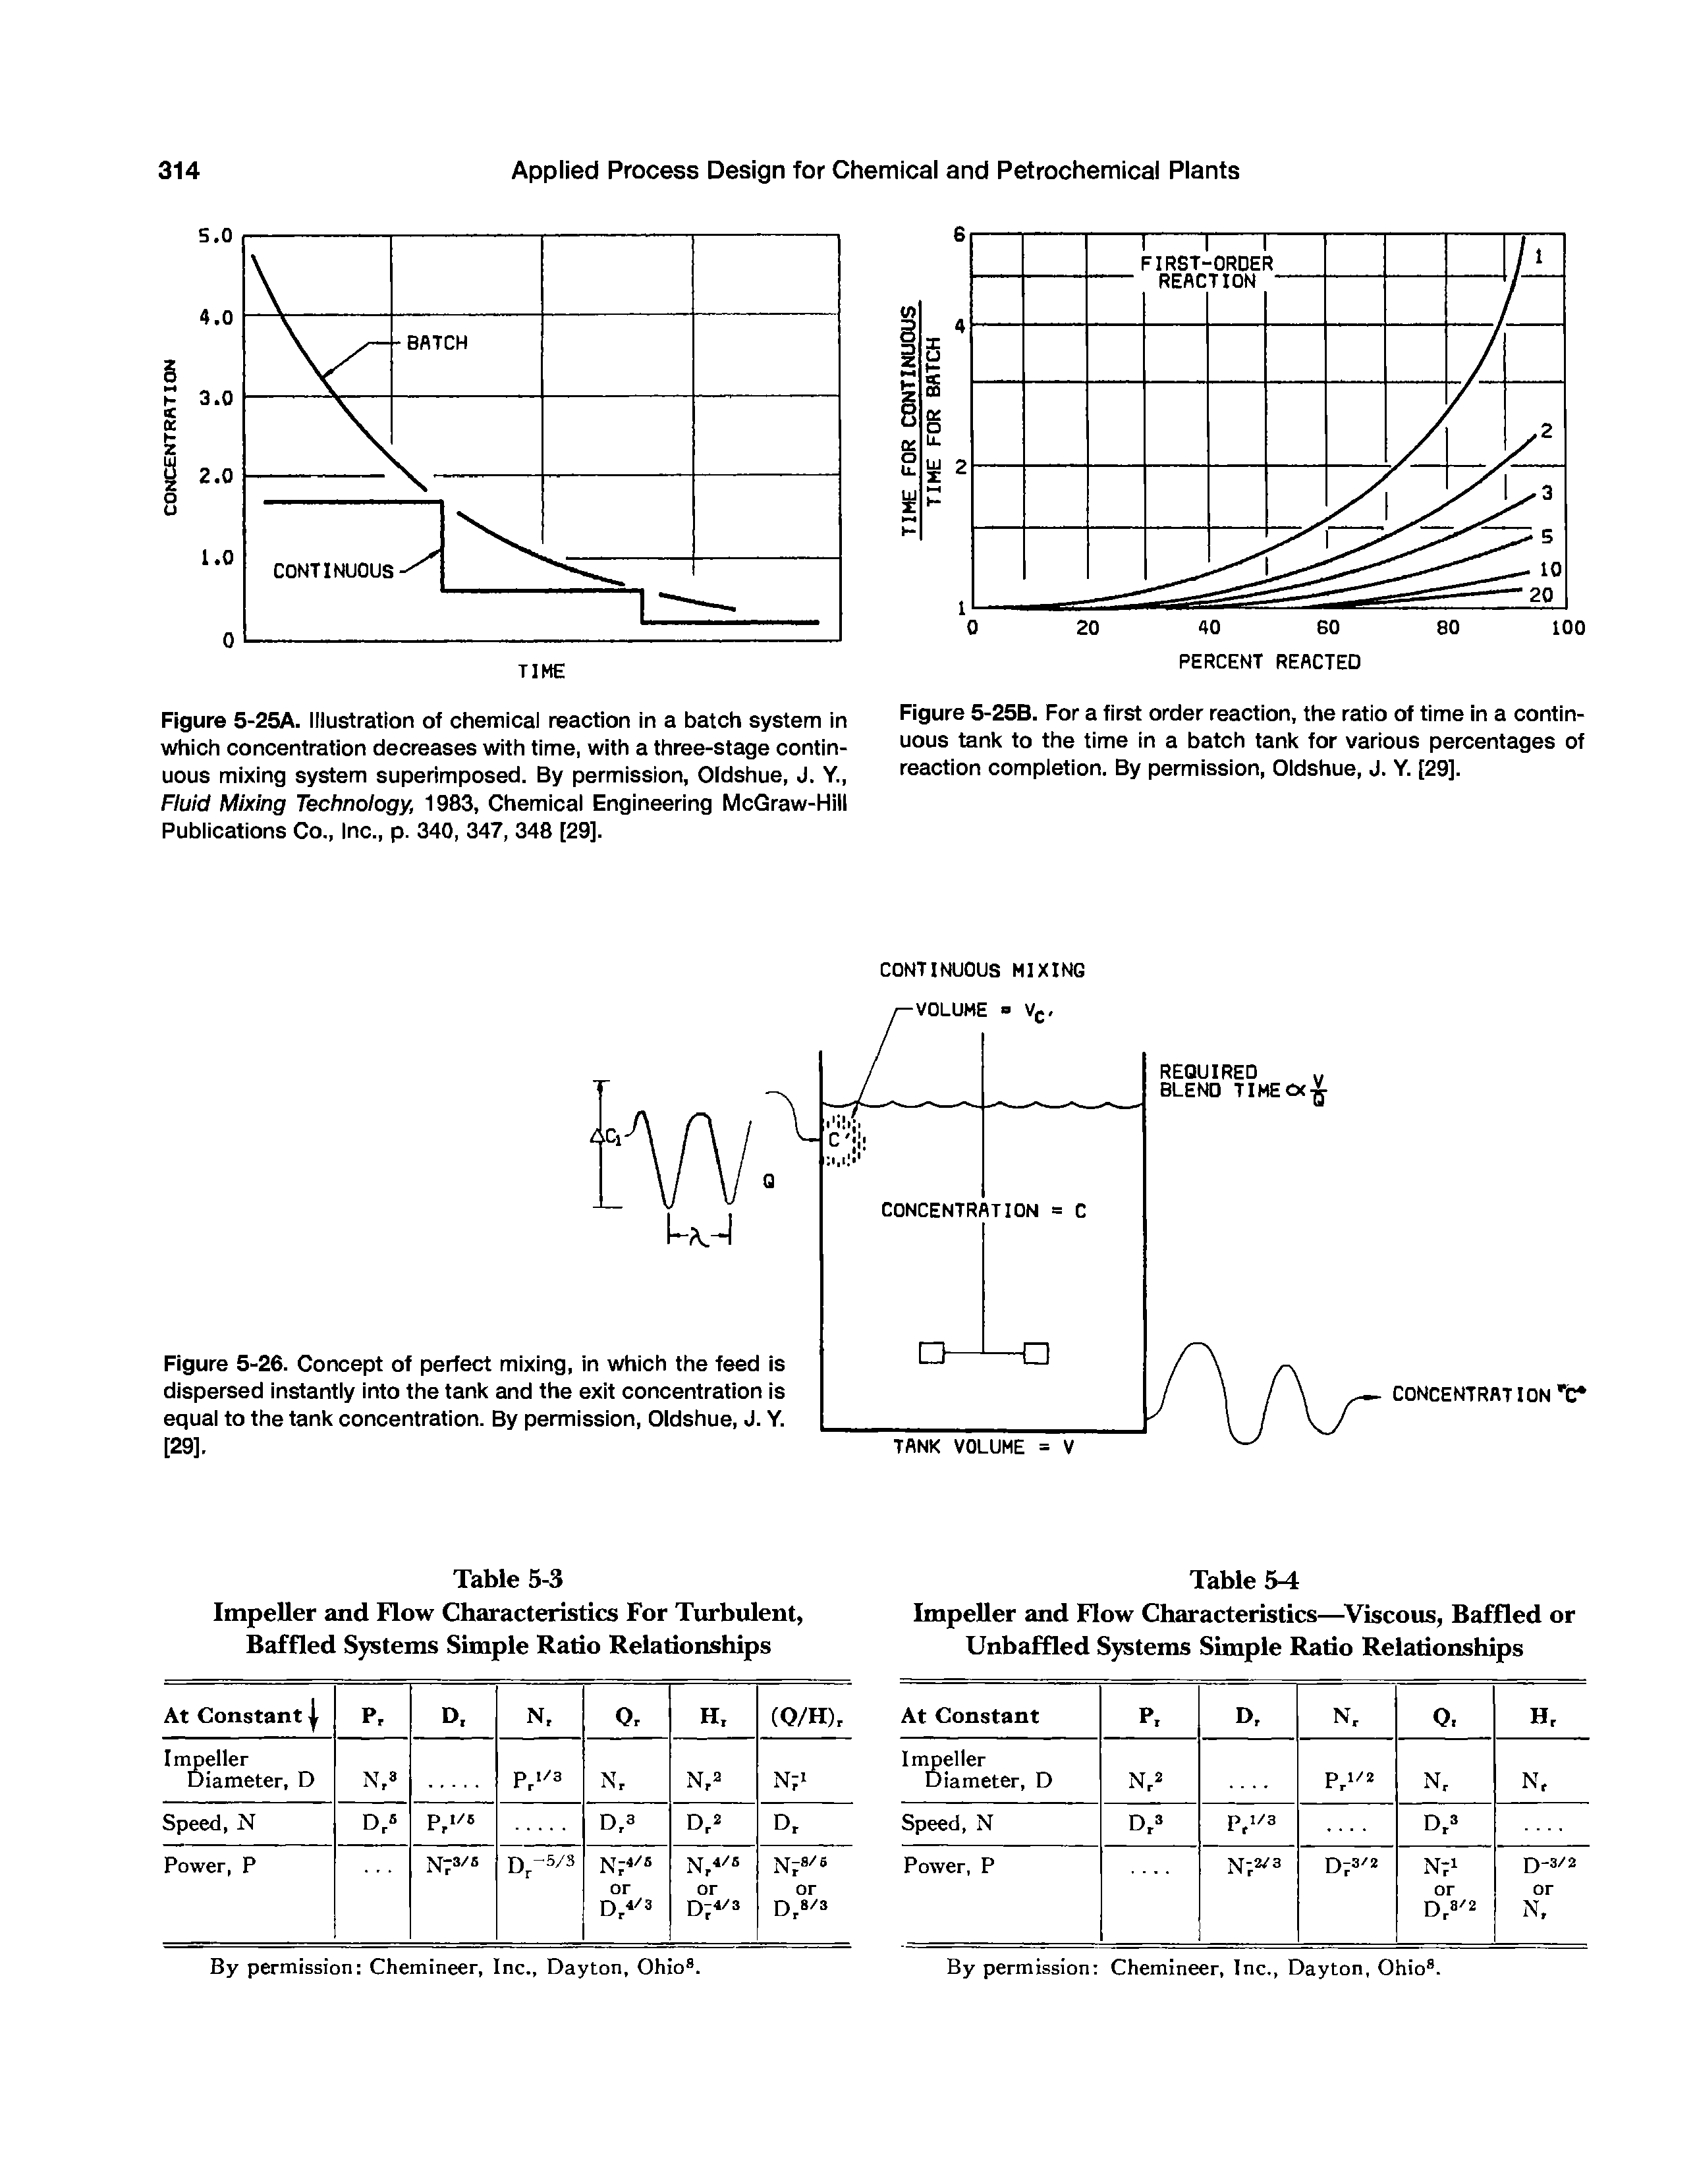 Figure 5-25B. For a first order reaction, the ratio of time in a continuous tank to the time in a batch tank for various percentages of reaction completion. By permission, Oidshue, J. Y. [29].